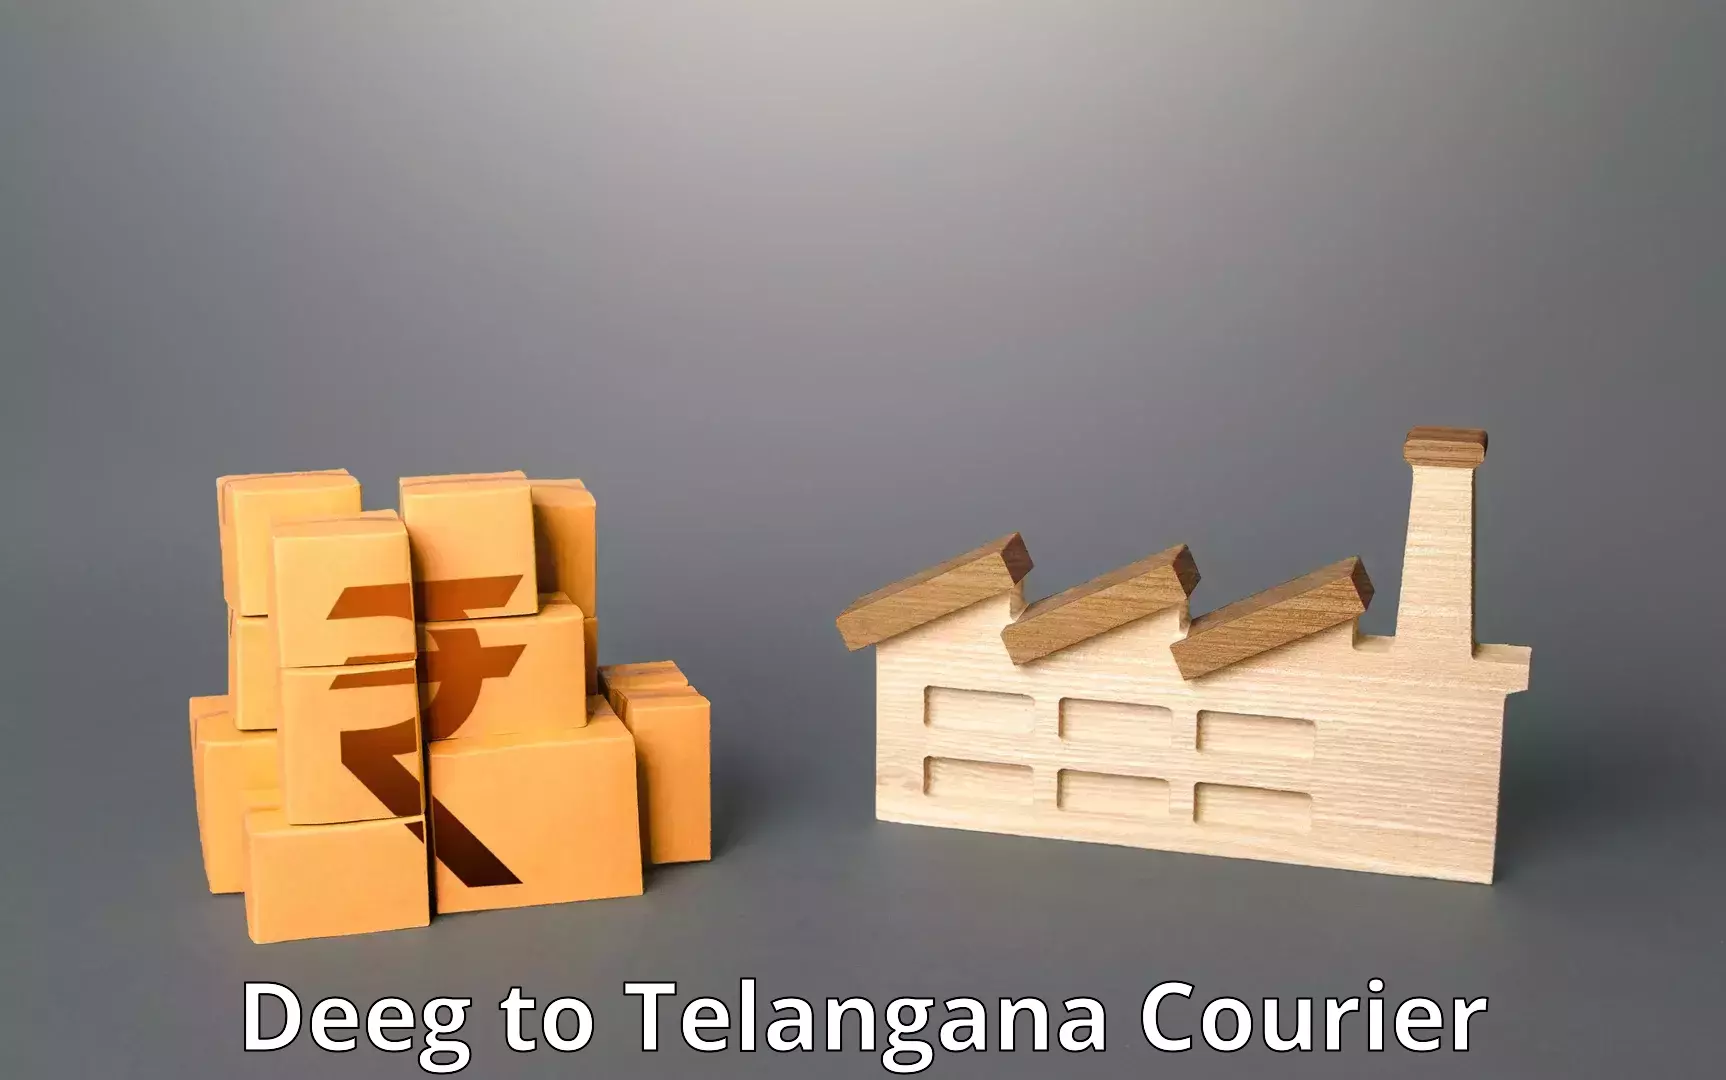 Courier service comparison Deeg to Telangana